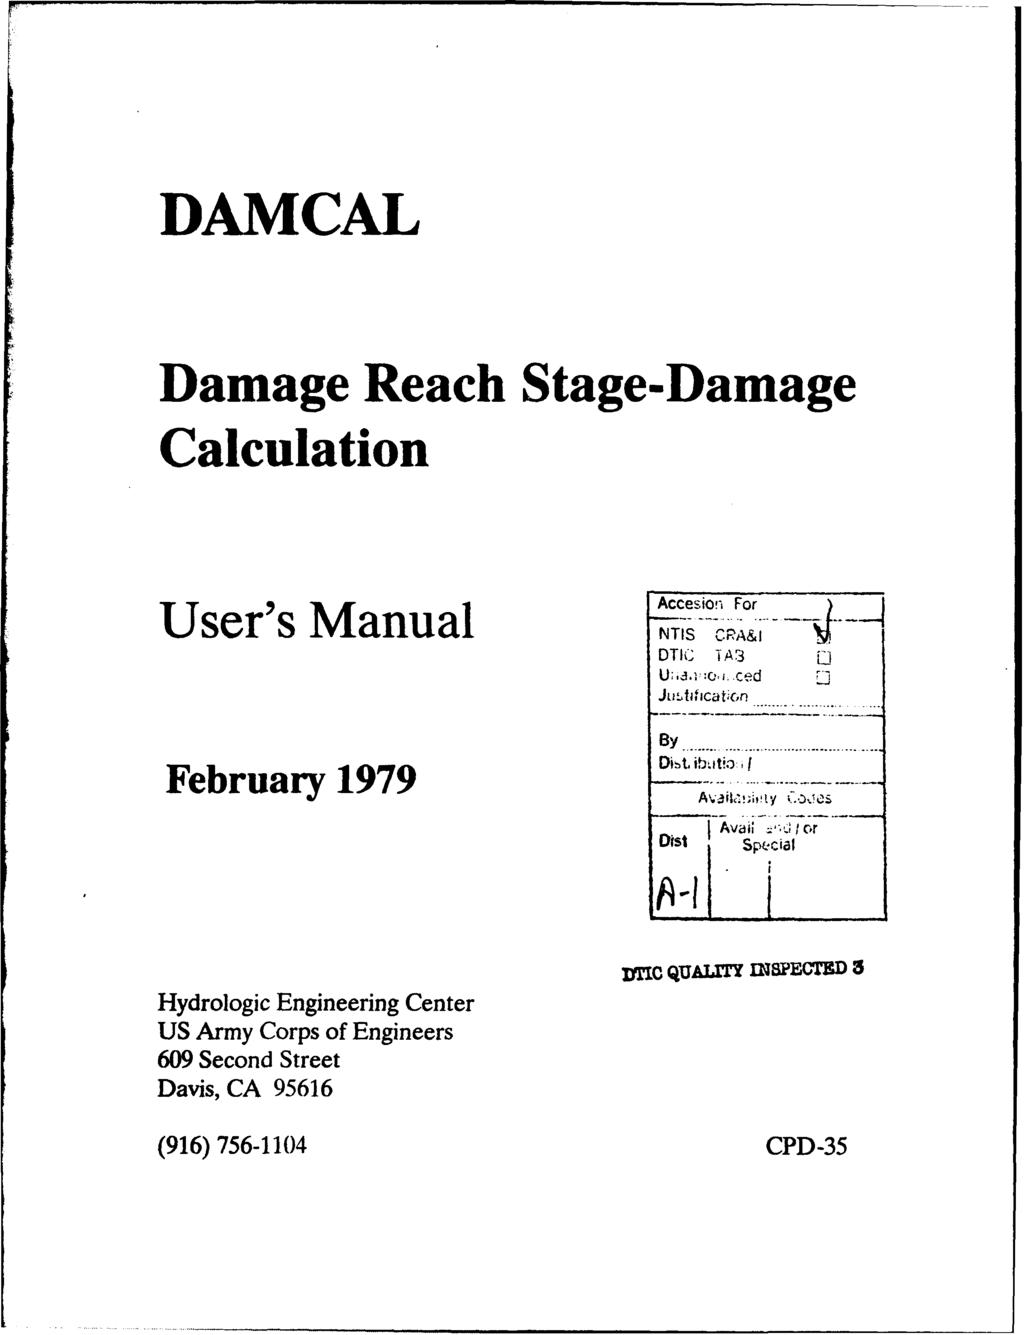 DAMCAL Damage Reach Stage-Damage Calculation Accesion For User's Manual TIS 'C&I DTIC TA.3 Juhfificatoc.n By...... February 1979 Dkt.